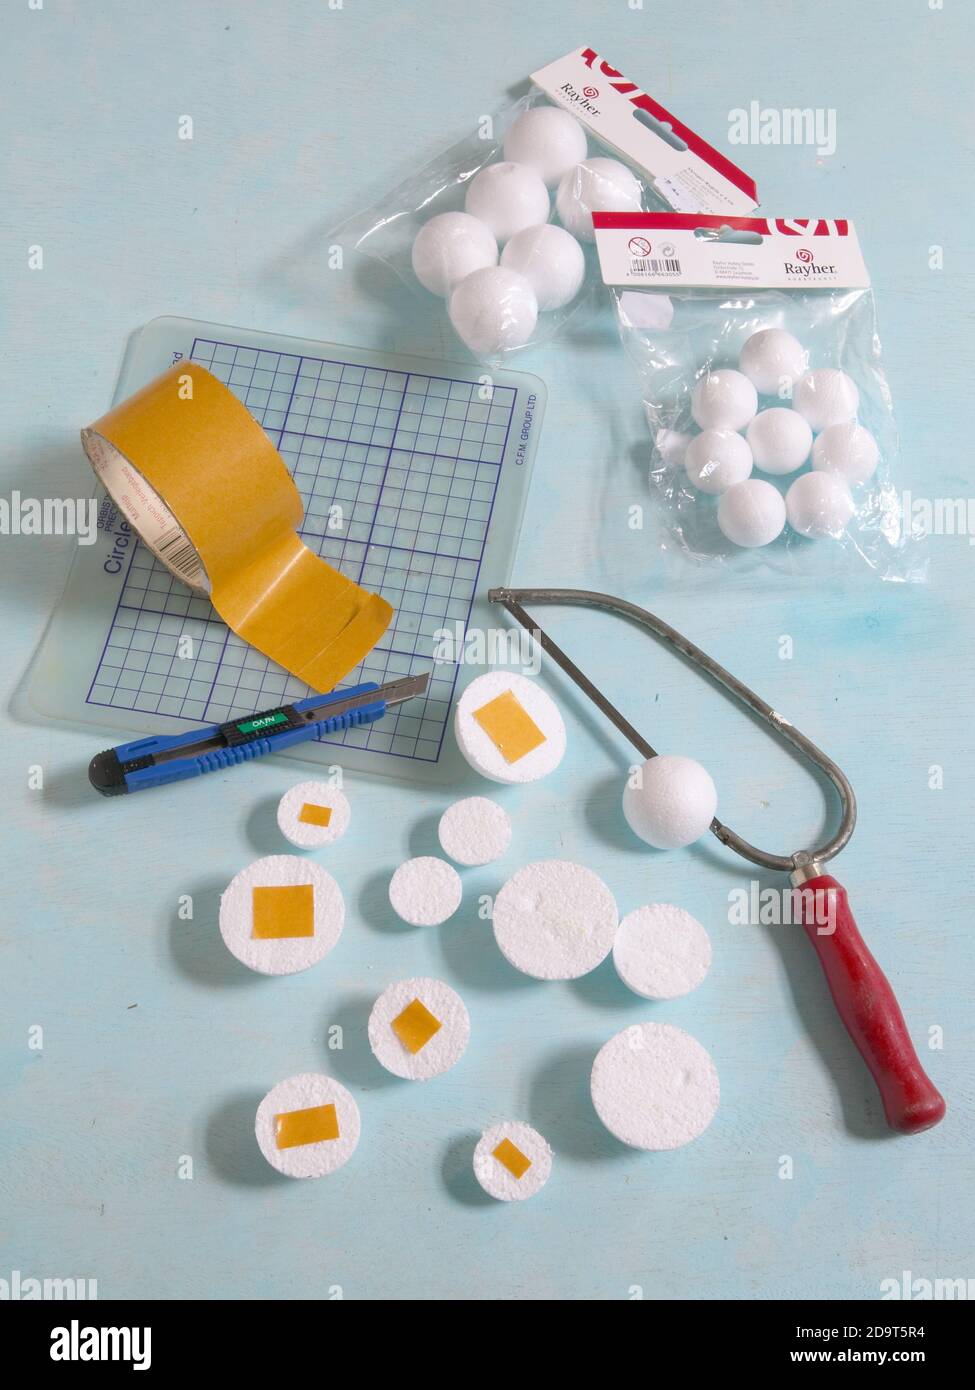 Split styrofoam balls and adhere tape    UK USE ONLY/EMAIL TO CLEAR OTHER RIGHTS Stock Photo